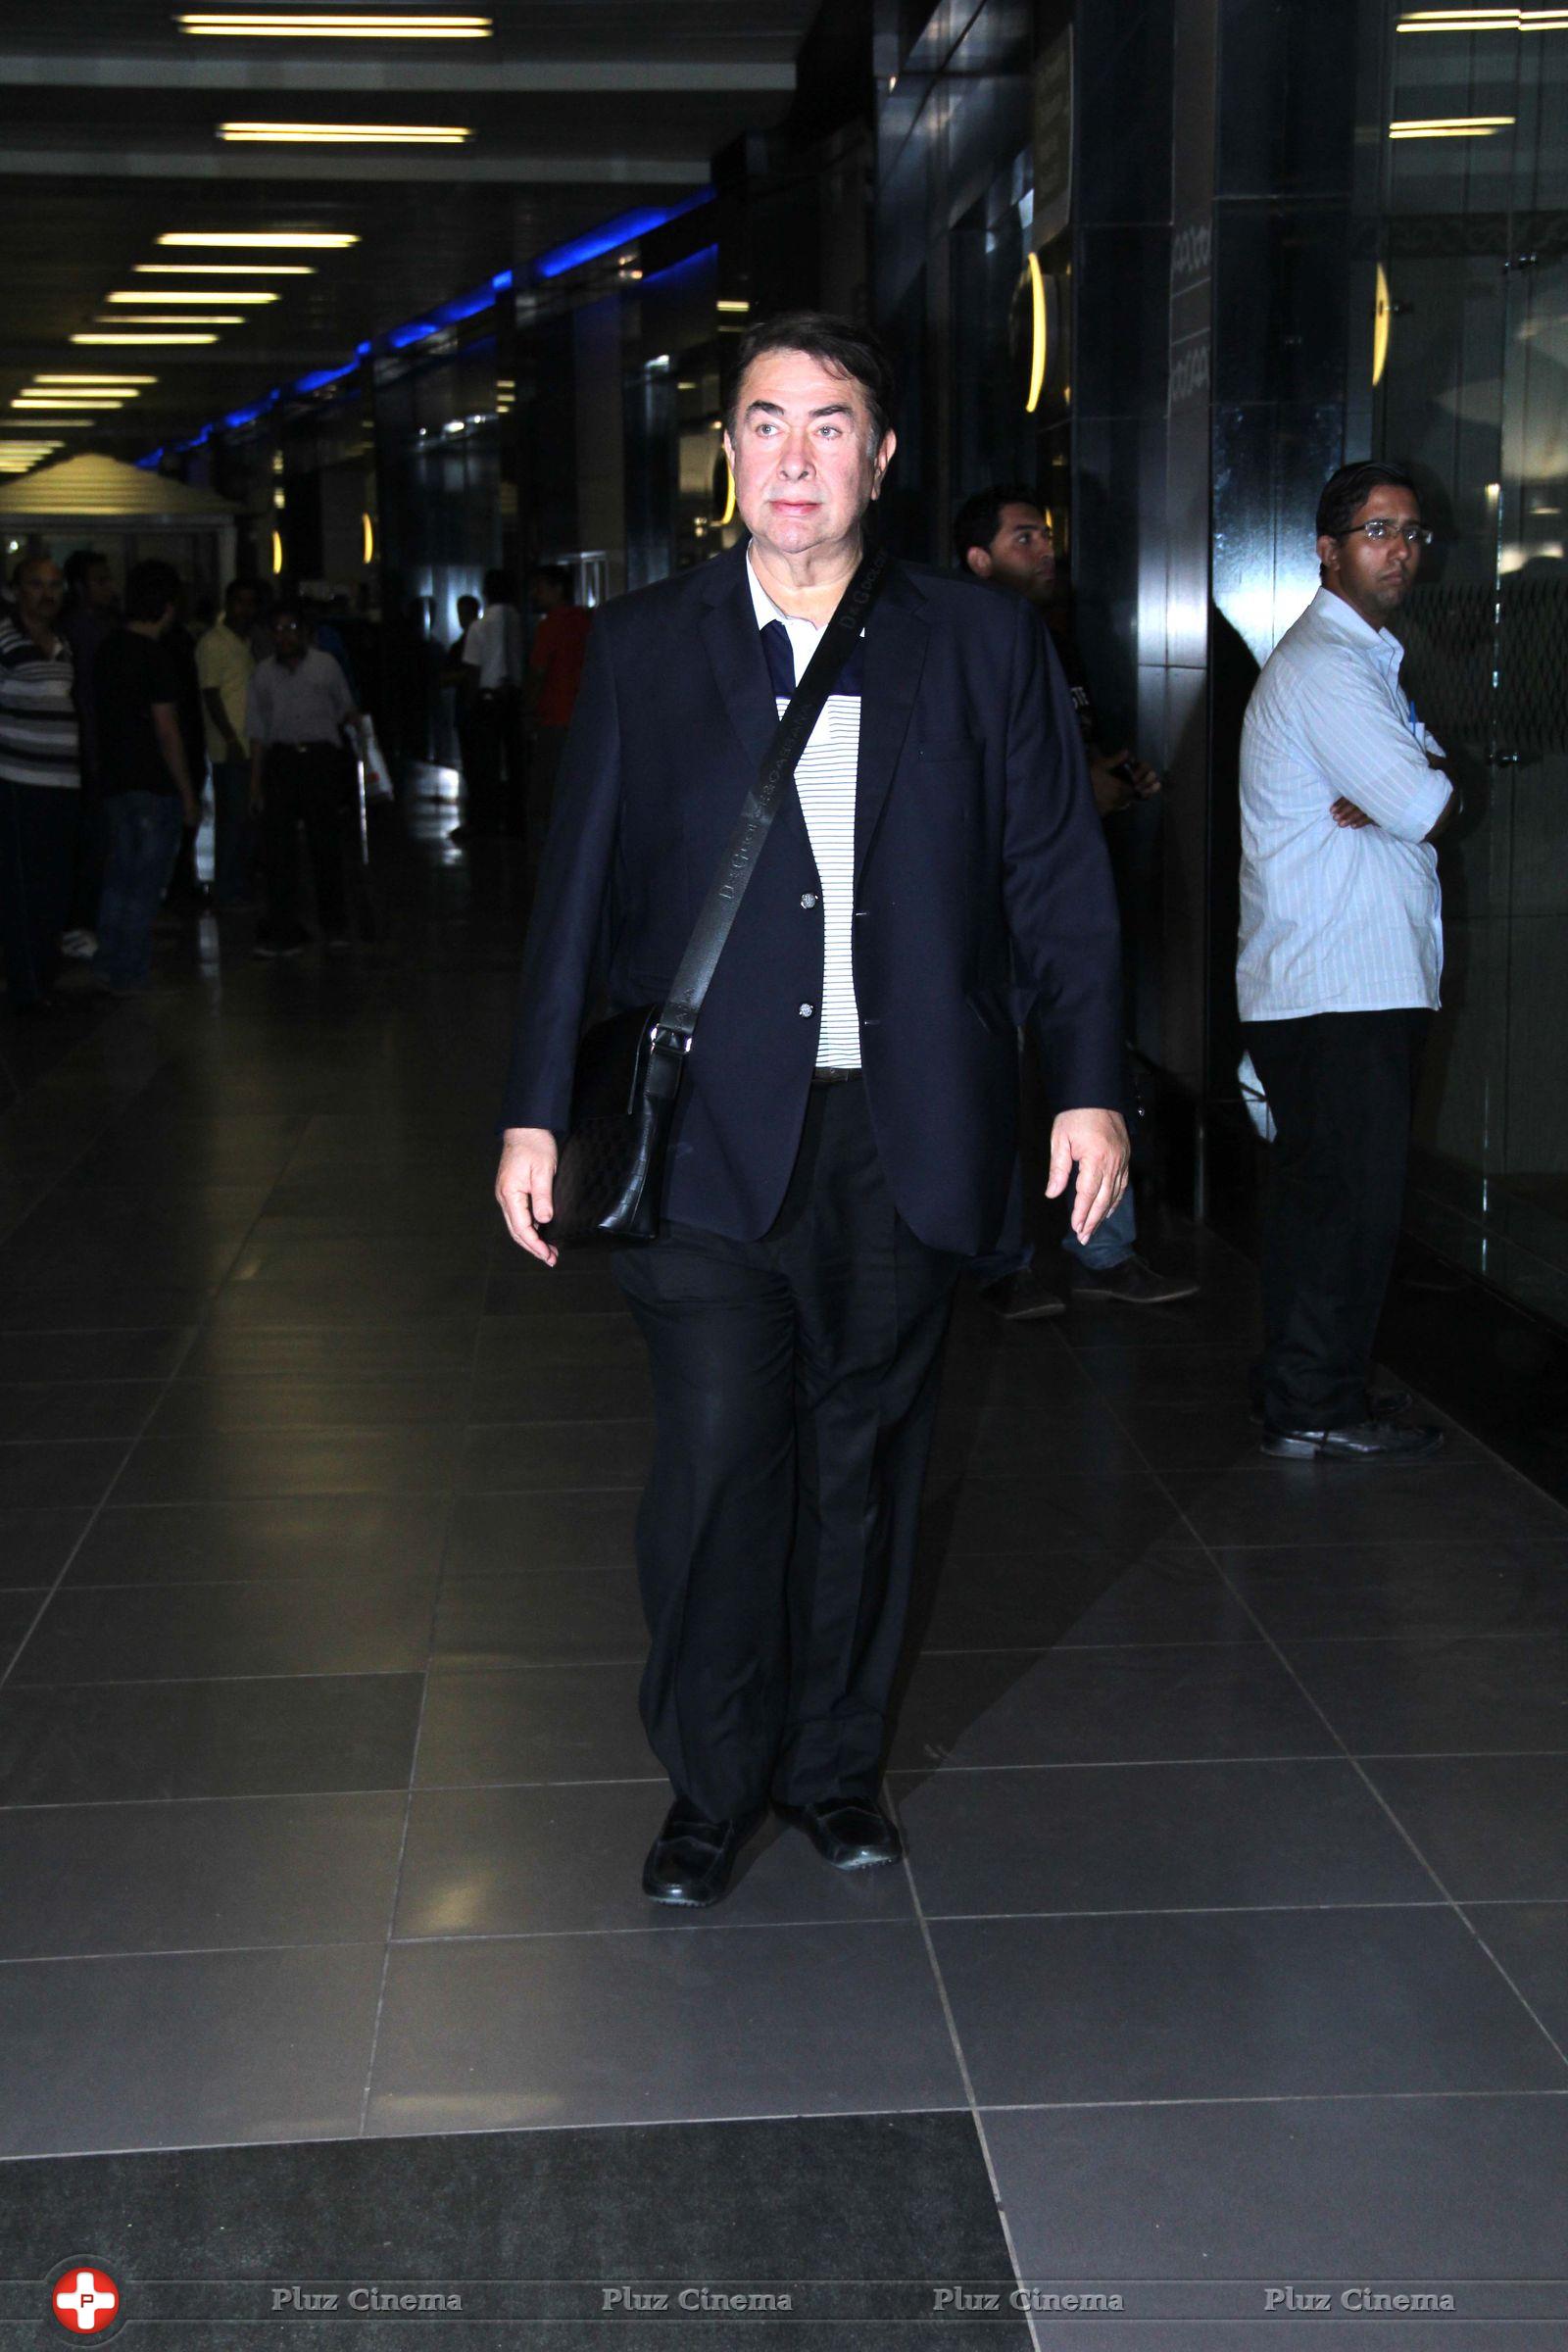 Randhir Kapoor - Rishi Kapoor, Randhir Kapoor and Neetu Singh snapped at mumbai airport photos | Picture 653351